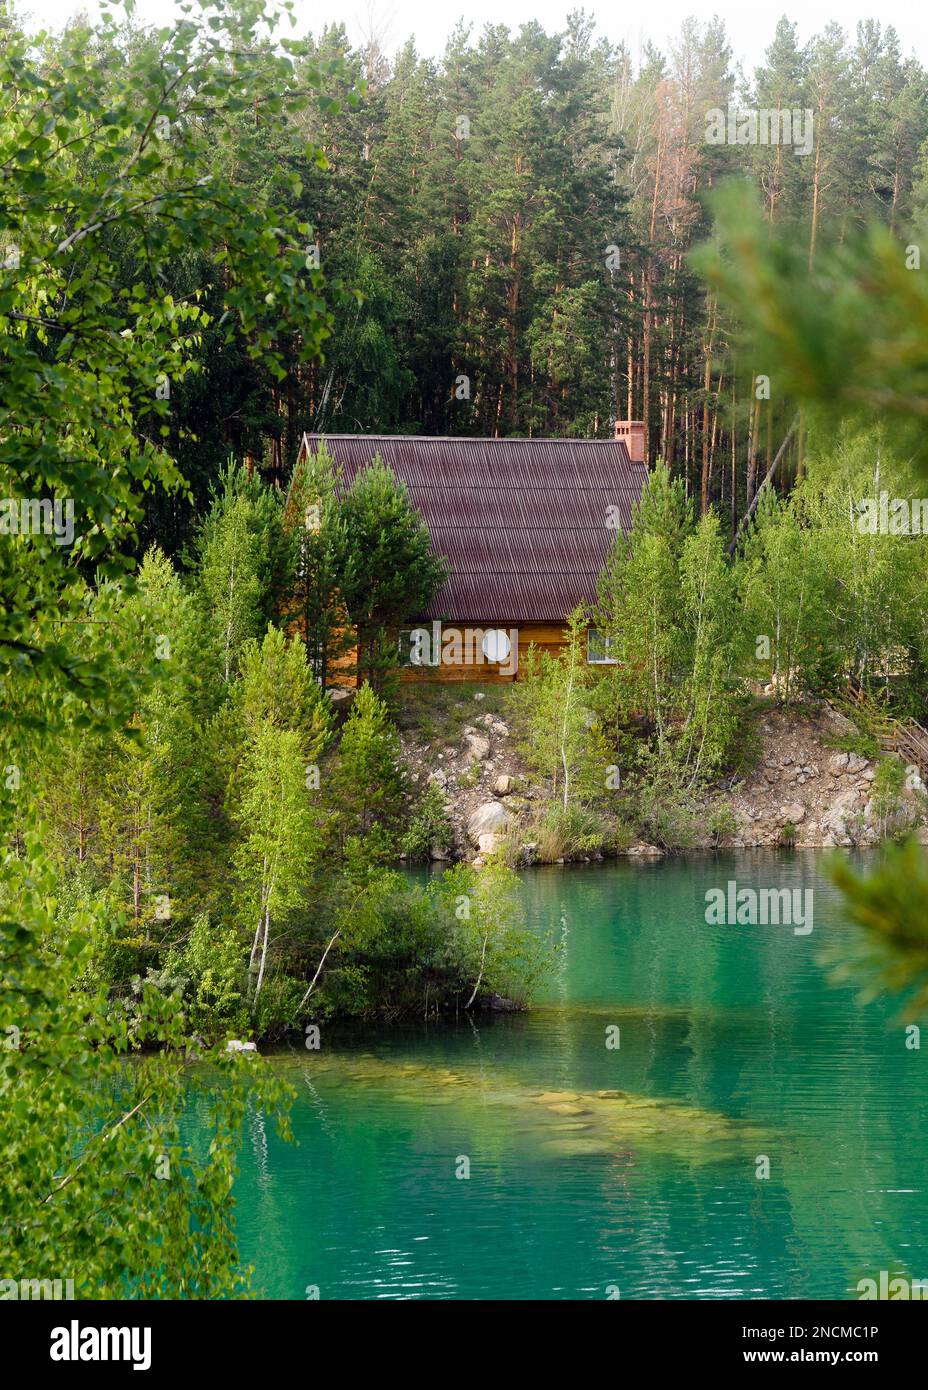 Wooden house with a satellite dish standing in the woods in the pine trees on the shores of stone lake with the island and turquoise water. Stock Photo